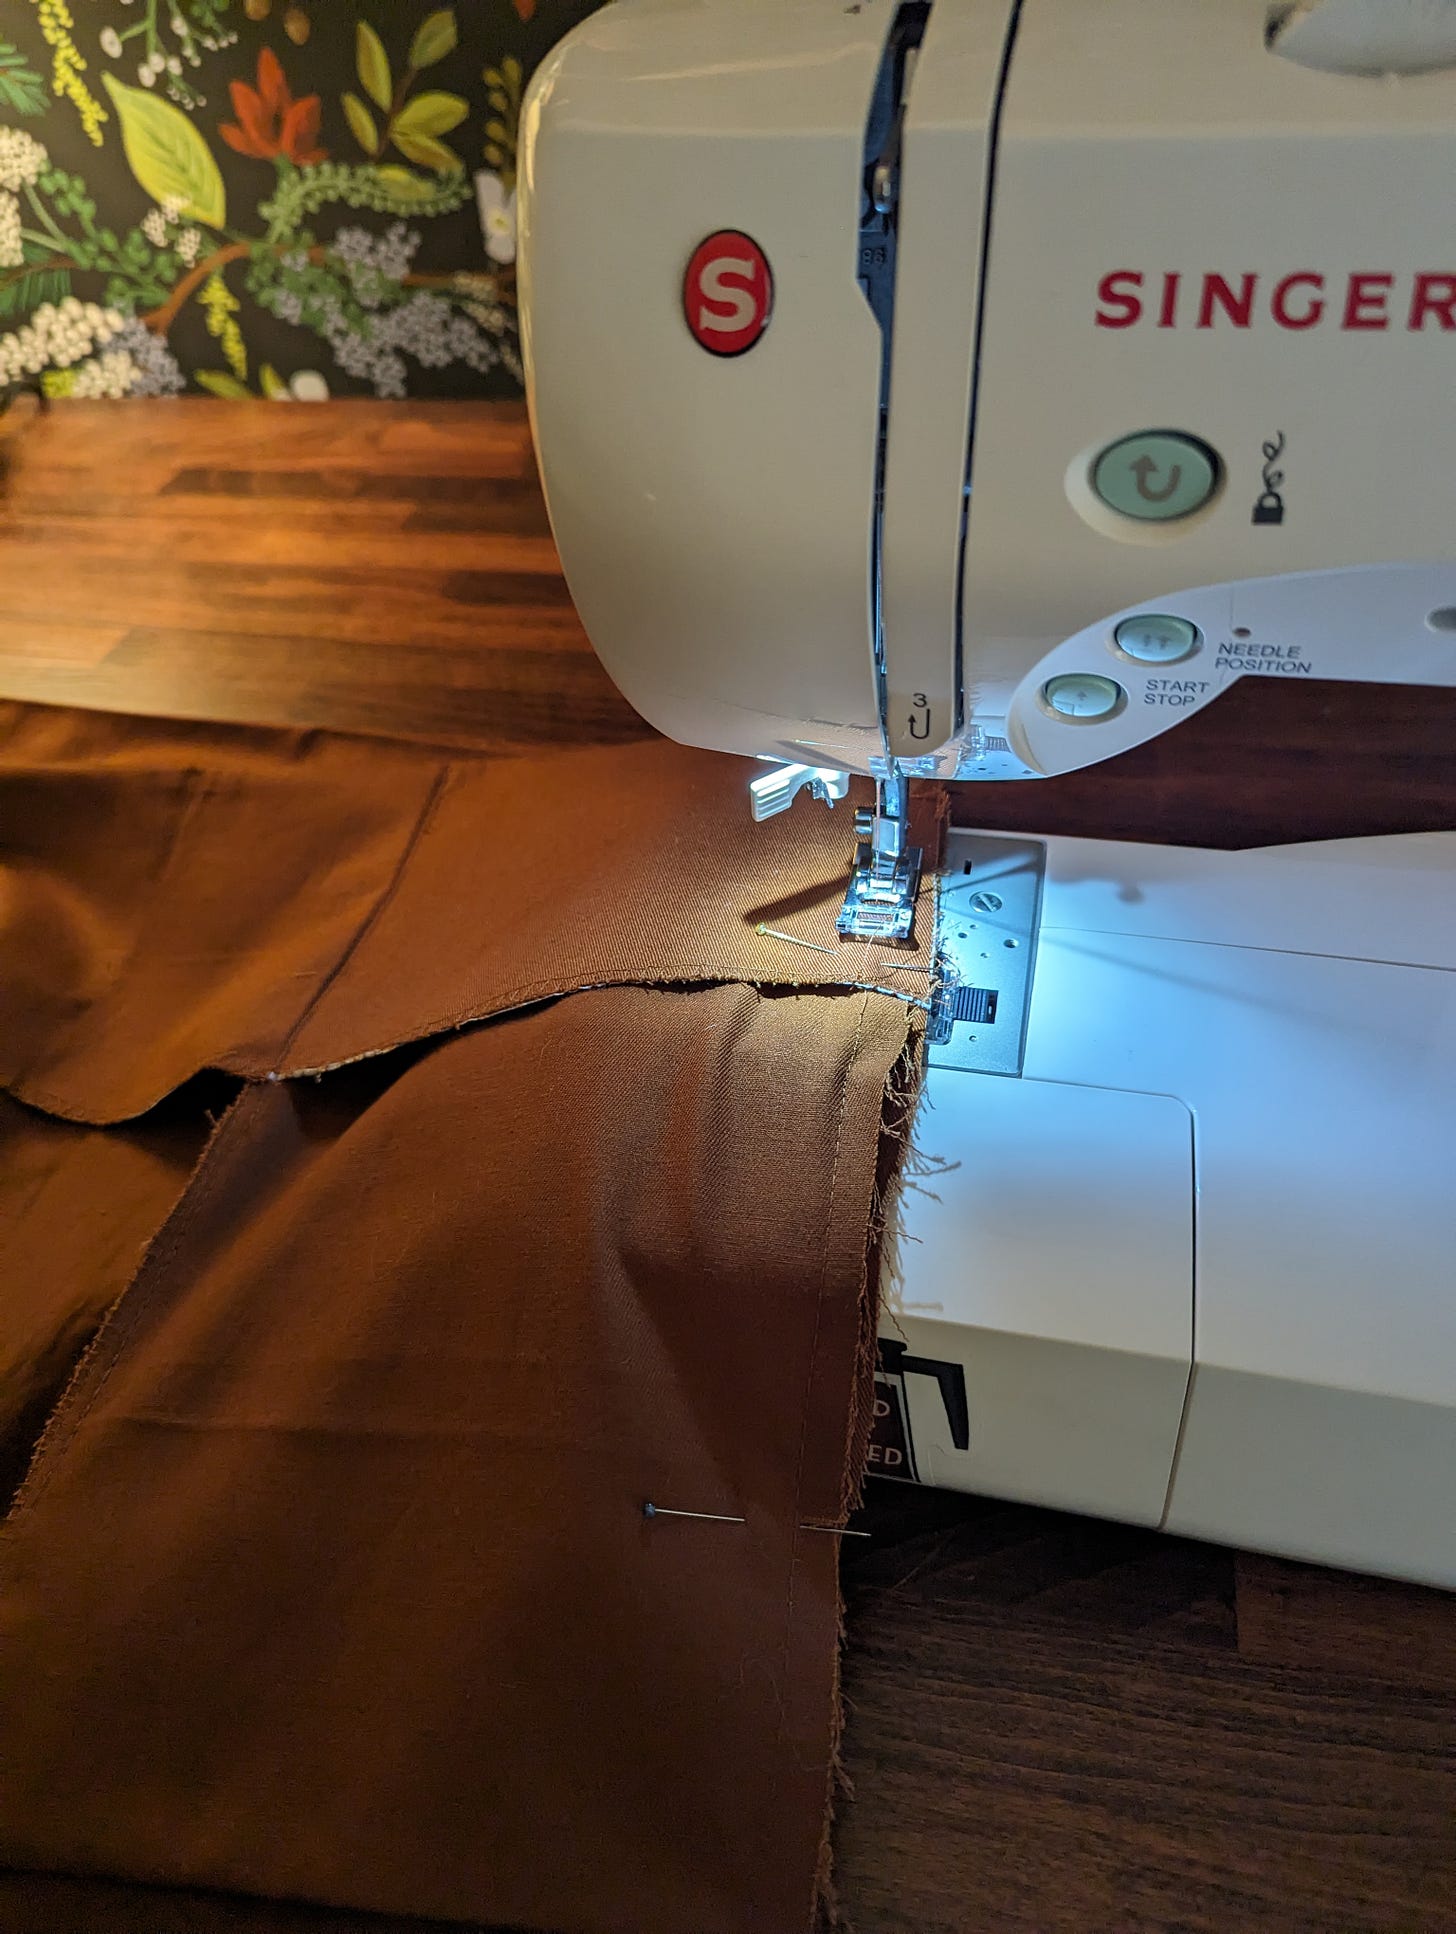 pants in progress on the sewing machine